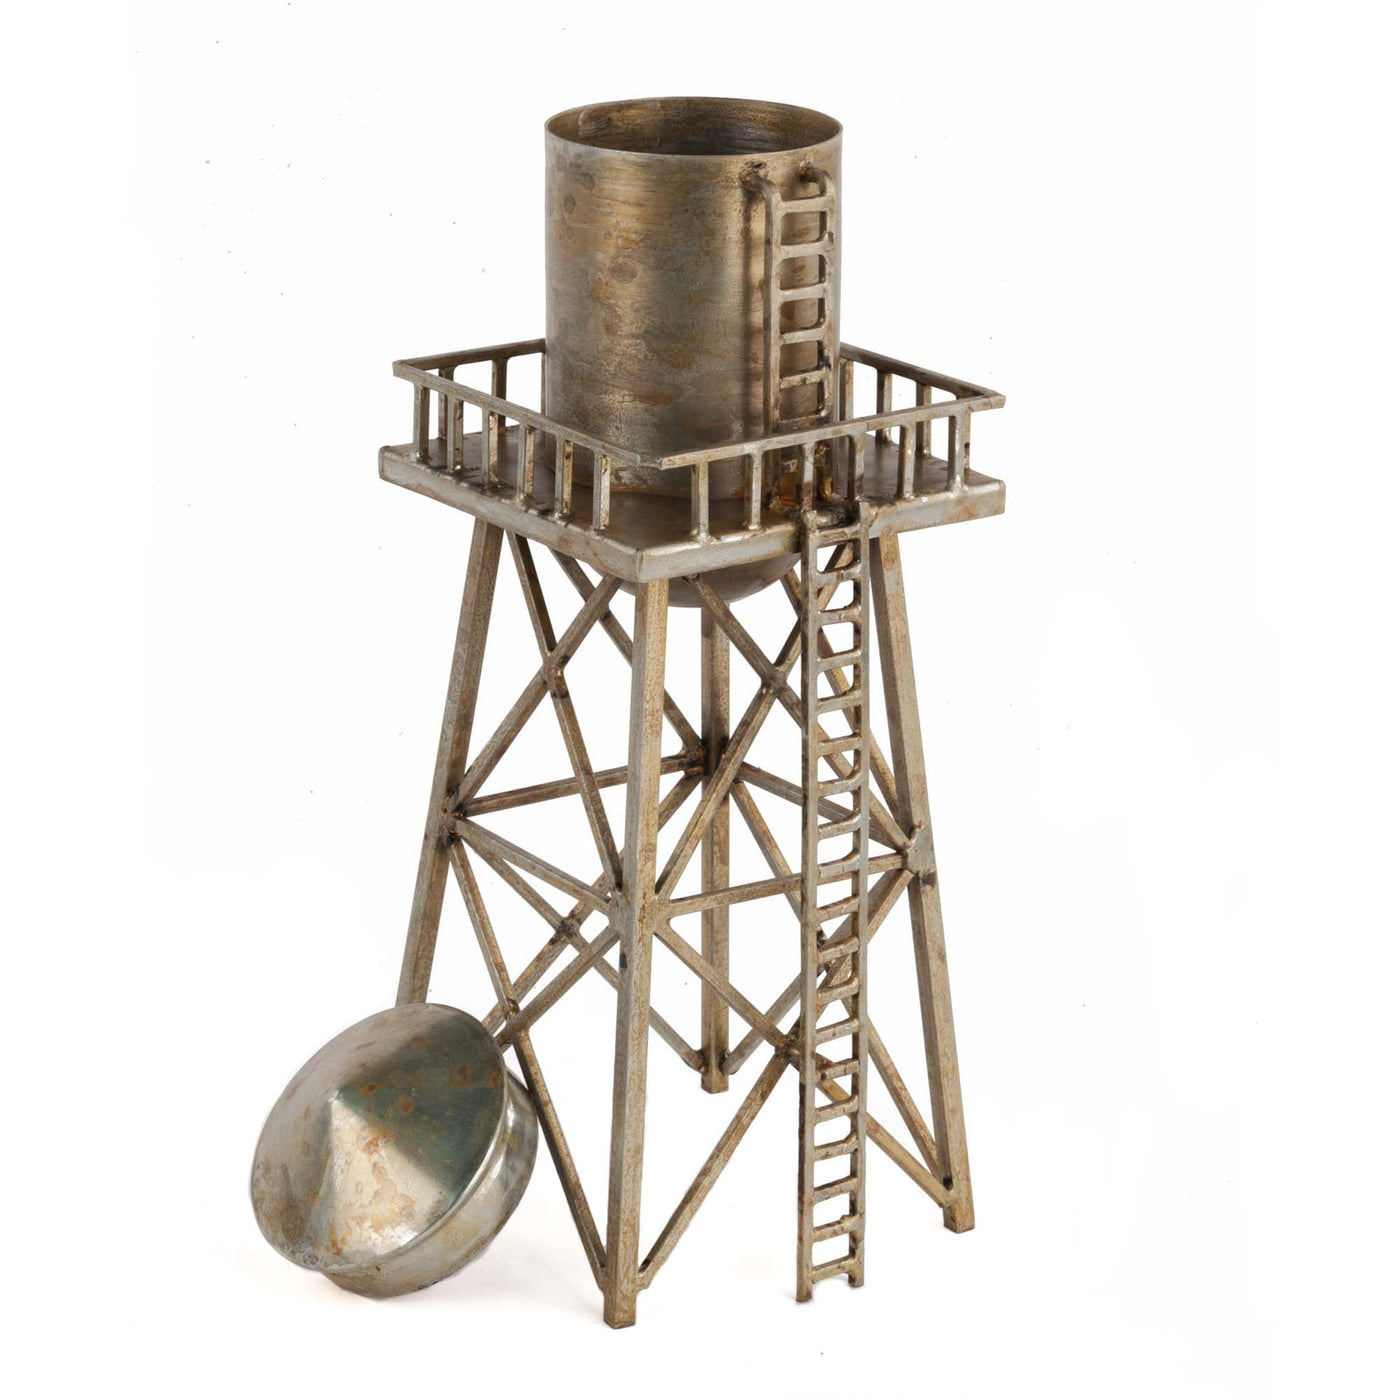 Water Tower Decorative Container